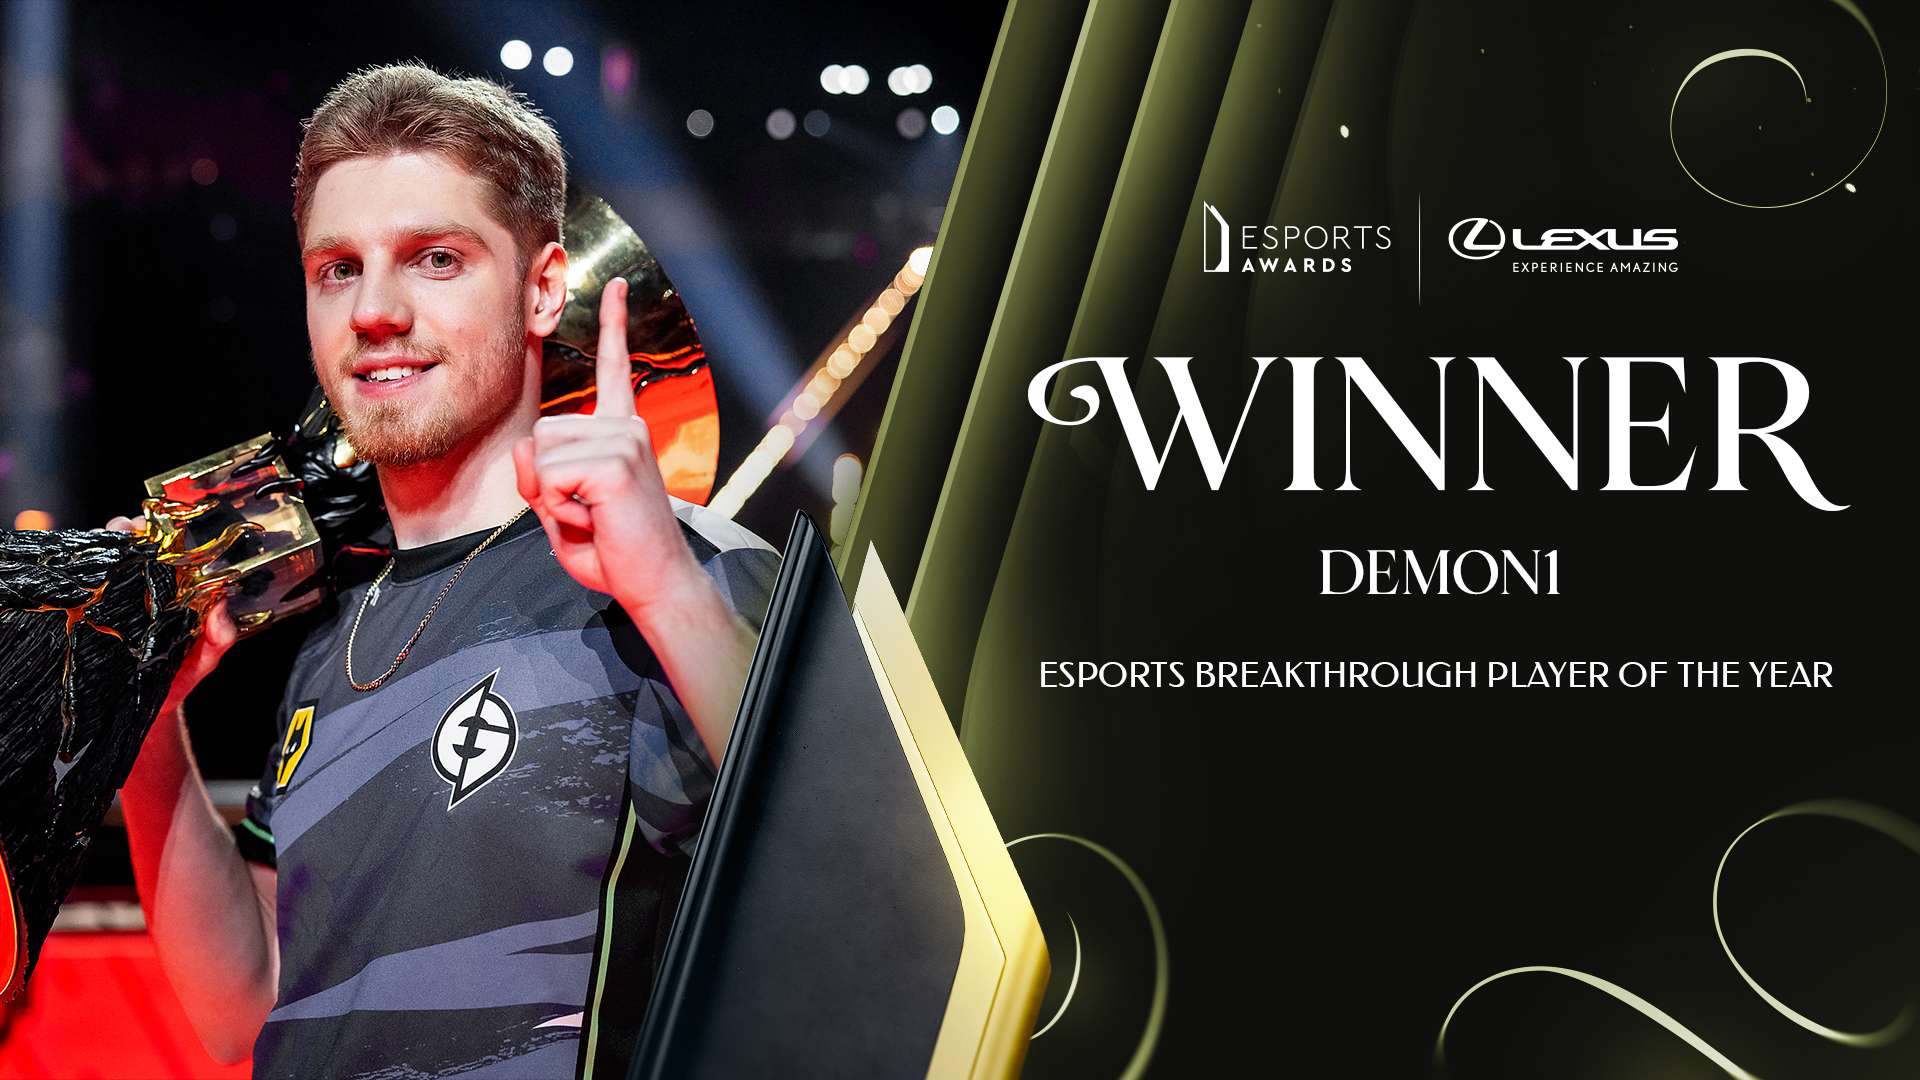 Esports Breakthrough Player of the Year thuộc về Demon1.